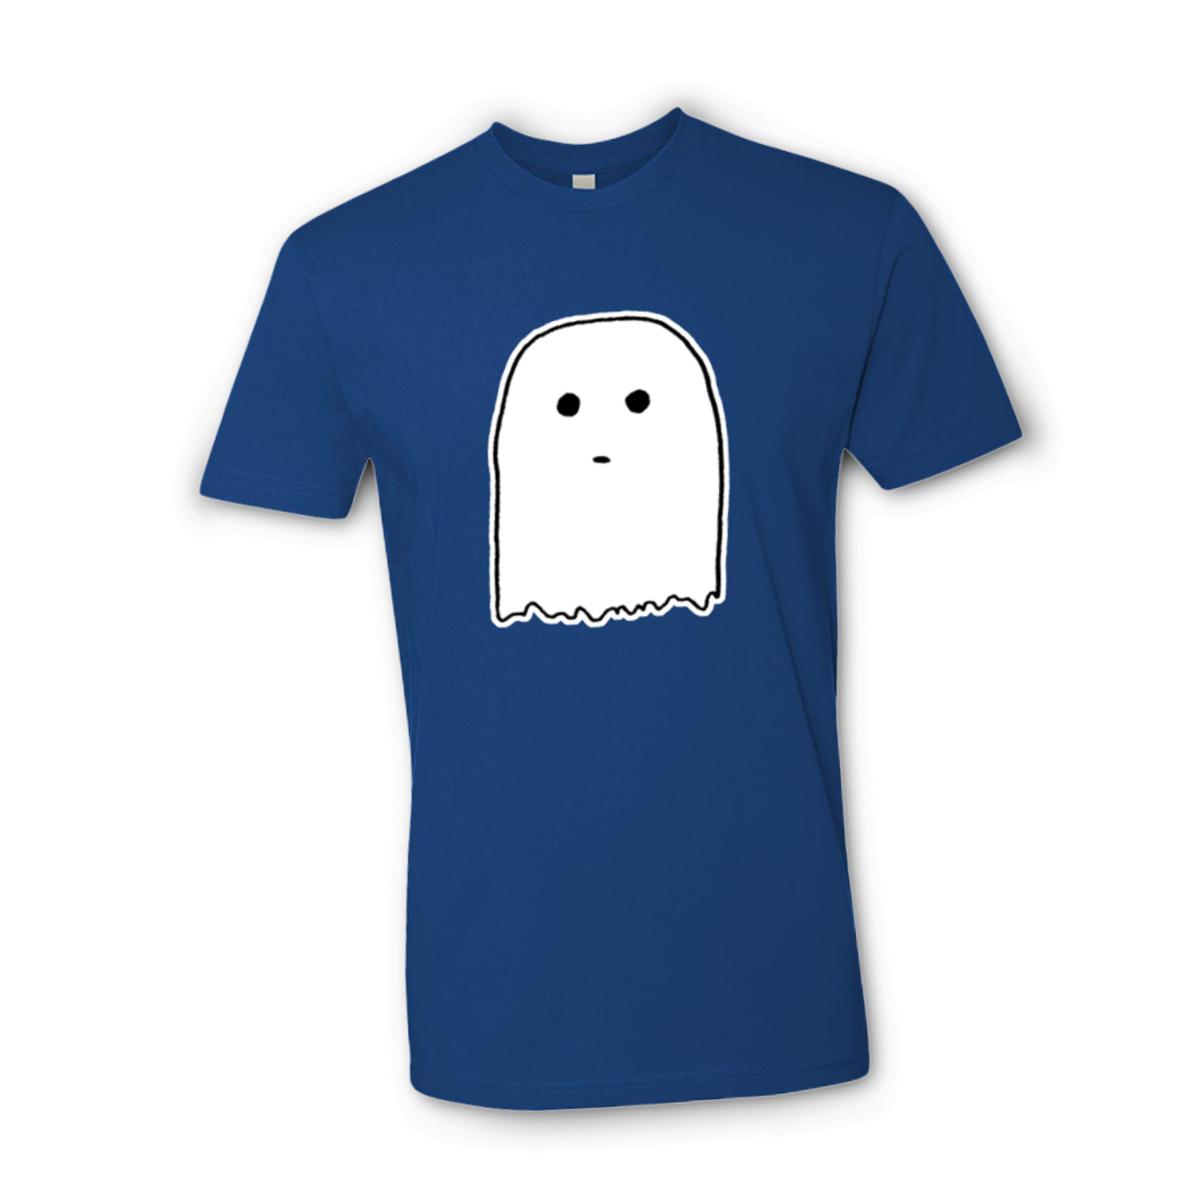 Ghostie Unisex Tee Double Extra Large royal-blue